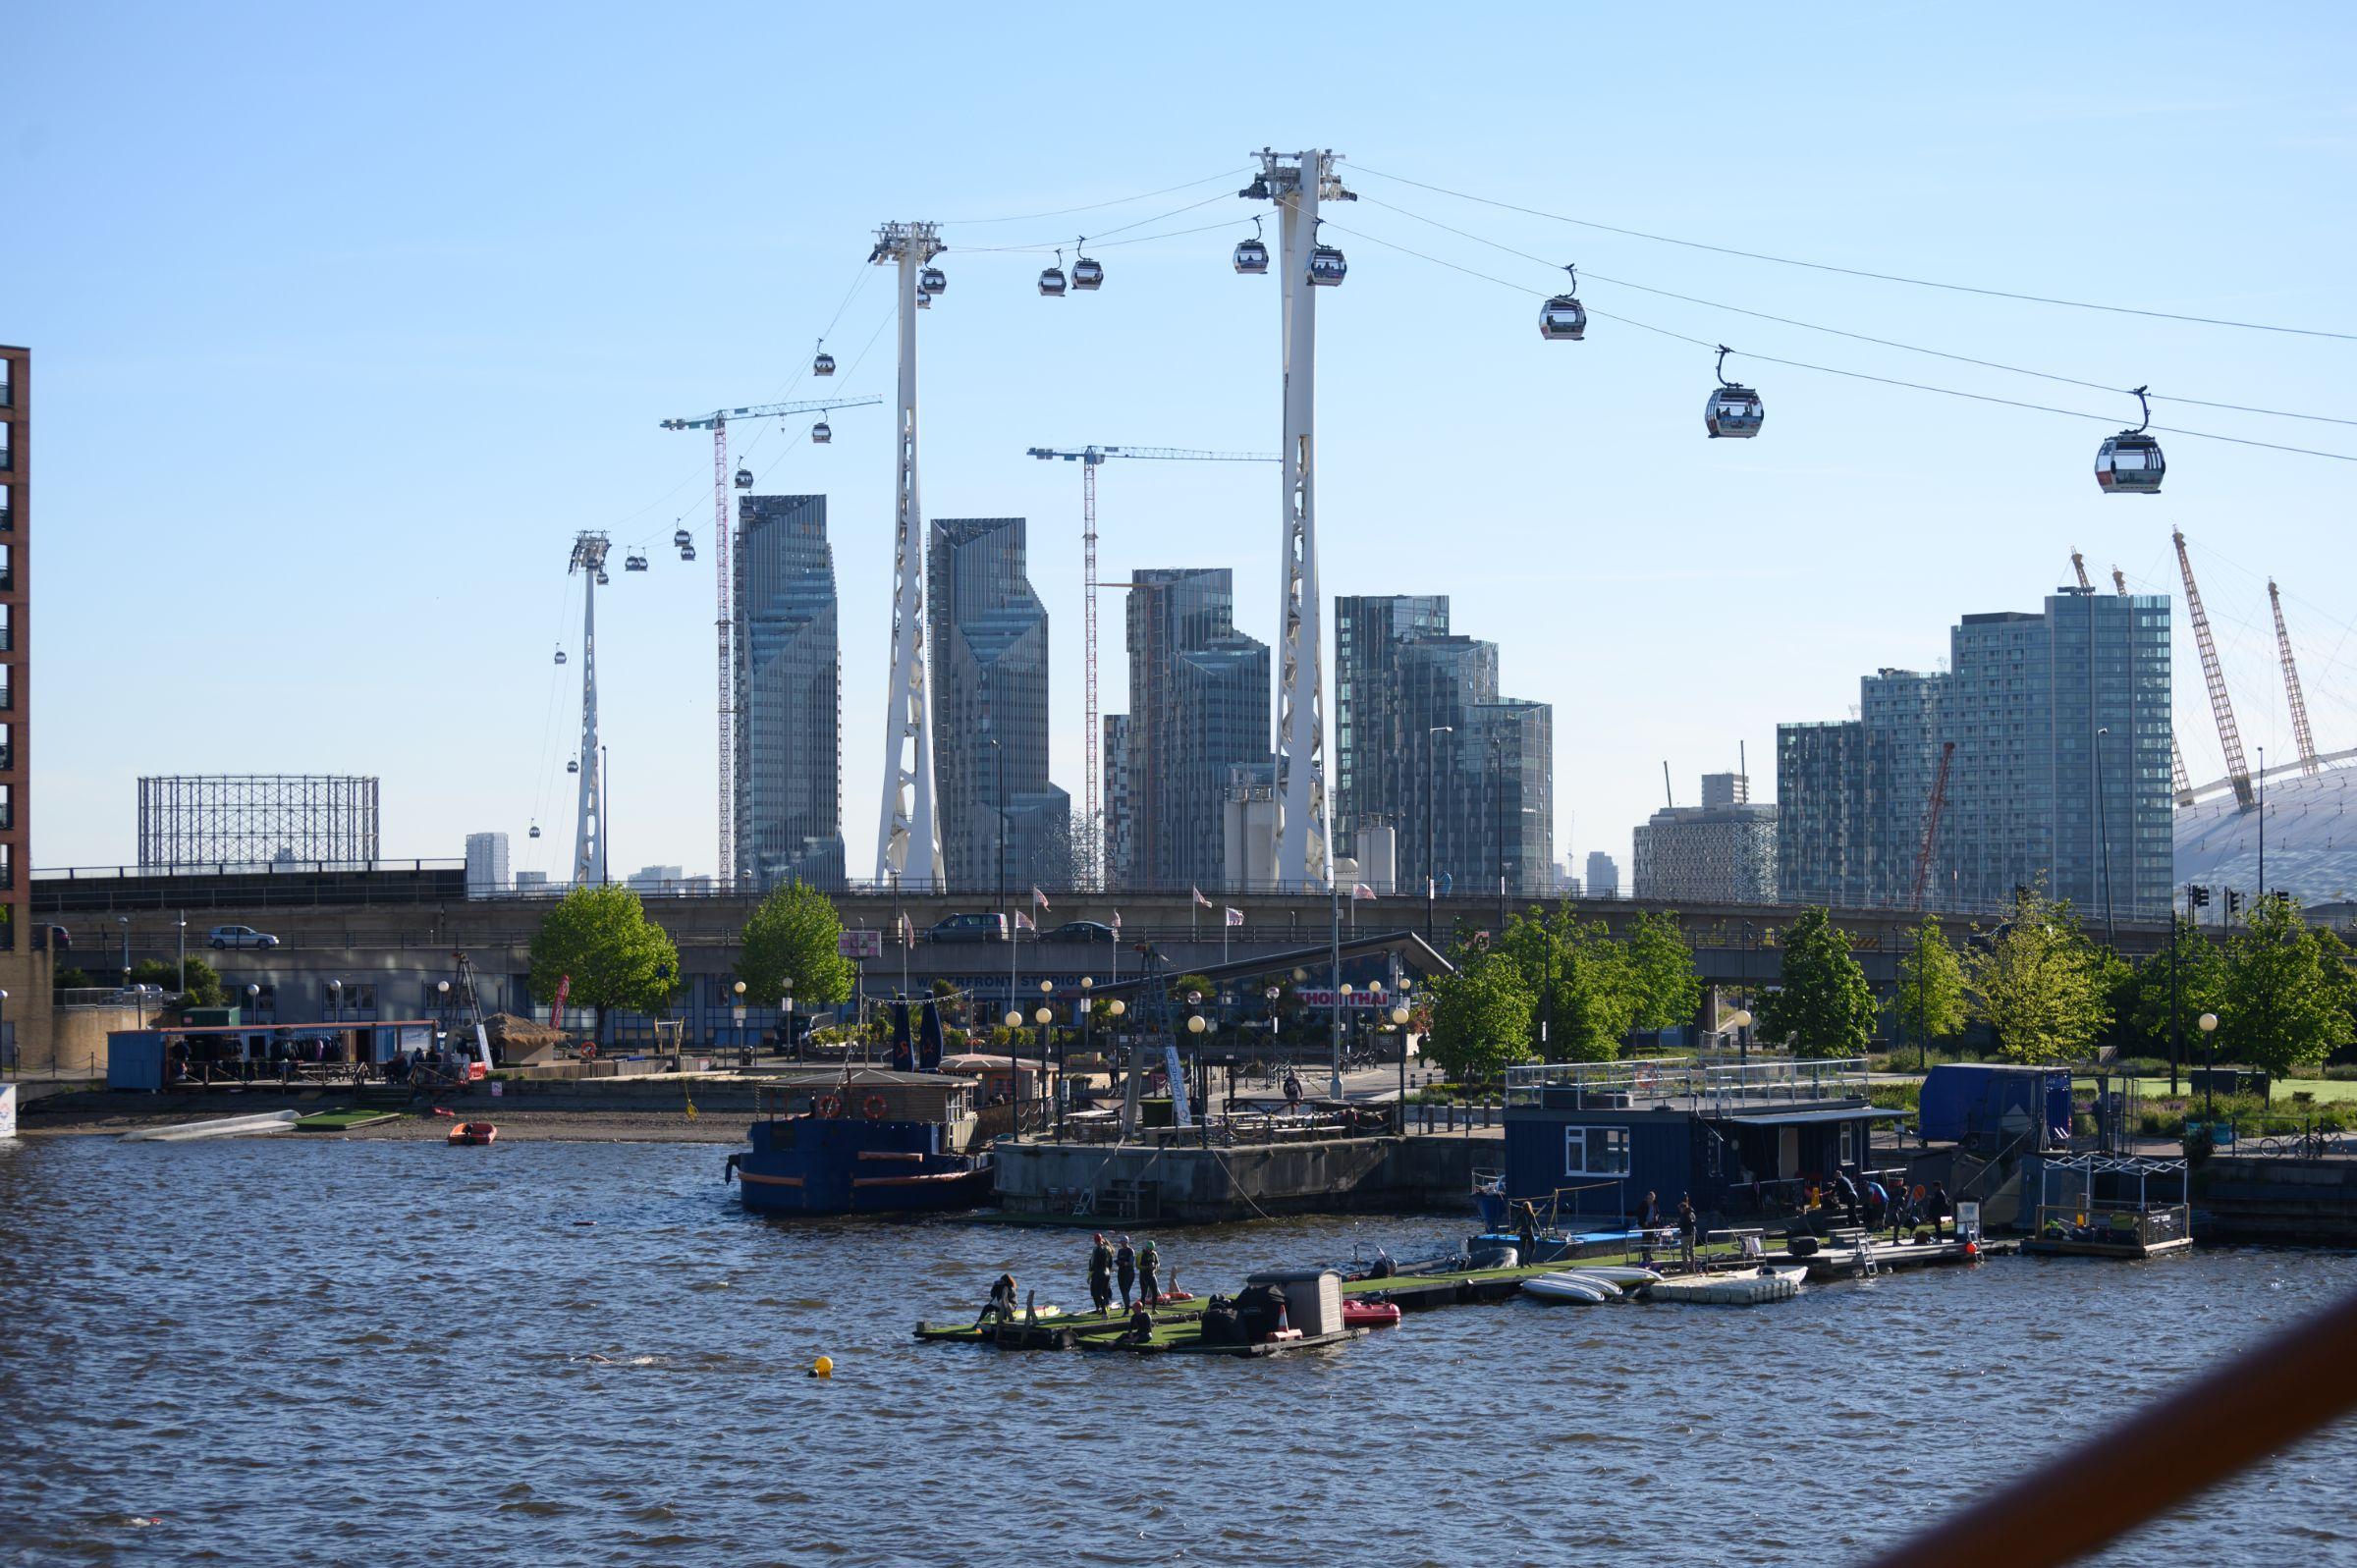 The water at the Royal Docks with the Emirates Cable Car in the background